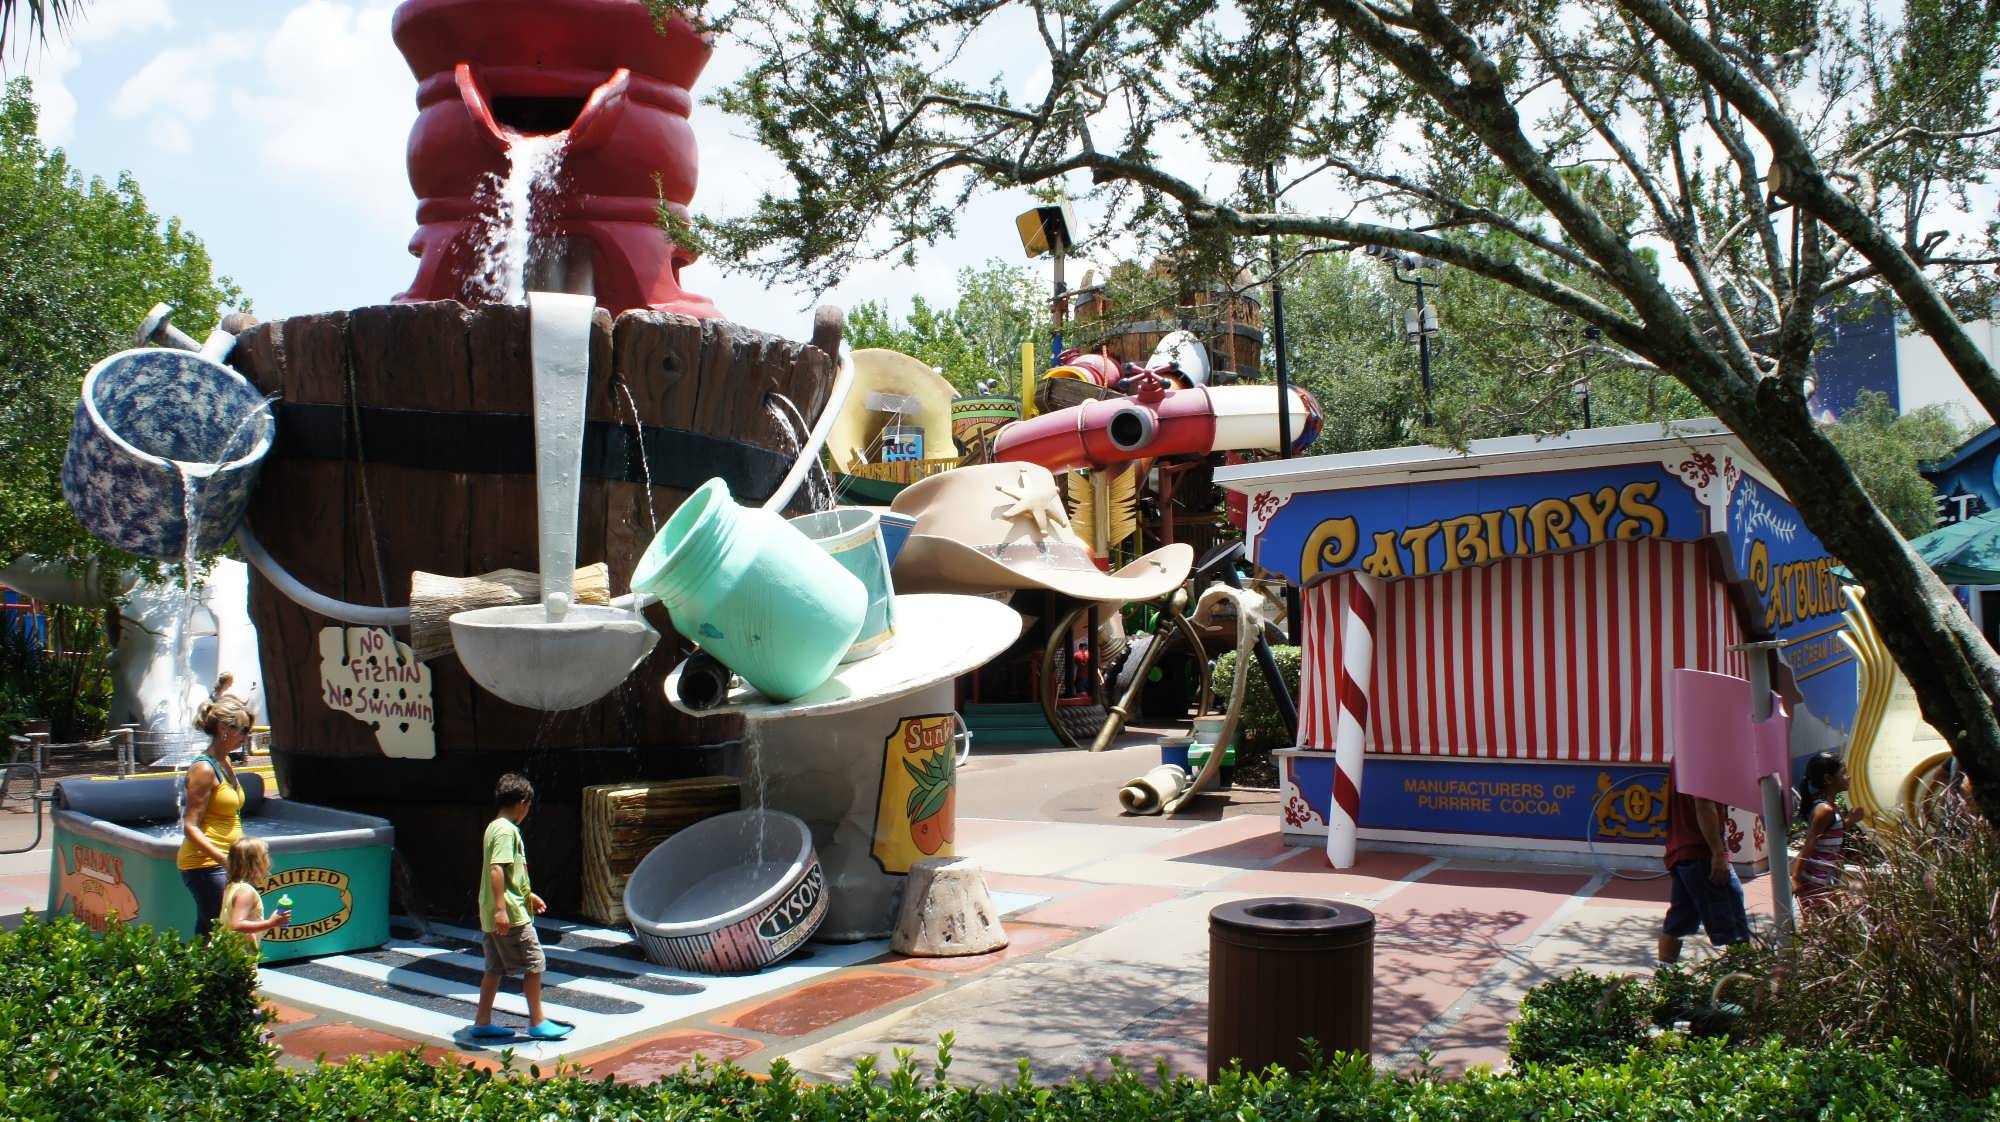 Toddler Guide For Island's of Adventure Rides, Play Areas, height  requirements (Universal Orlando) - Mouse Ear Memories